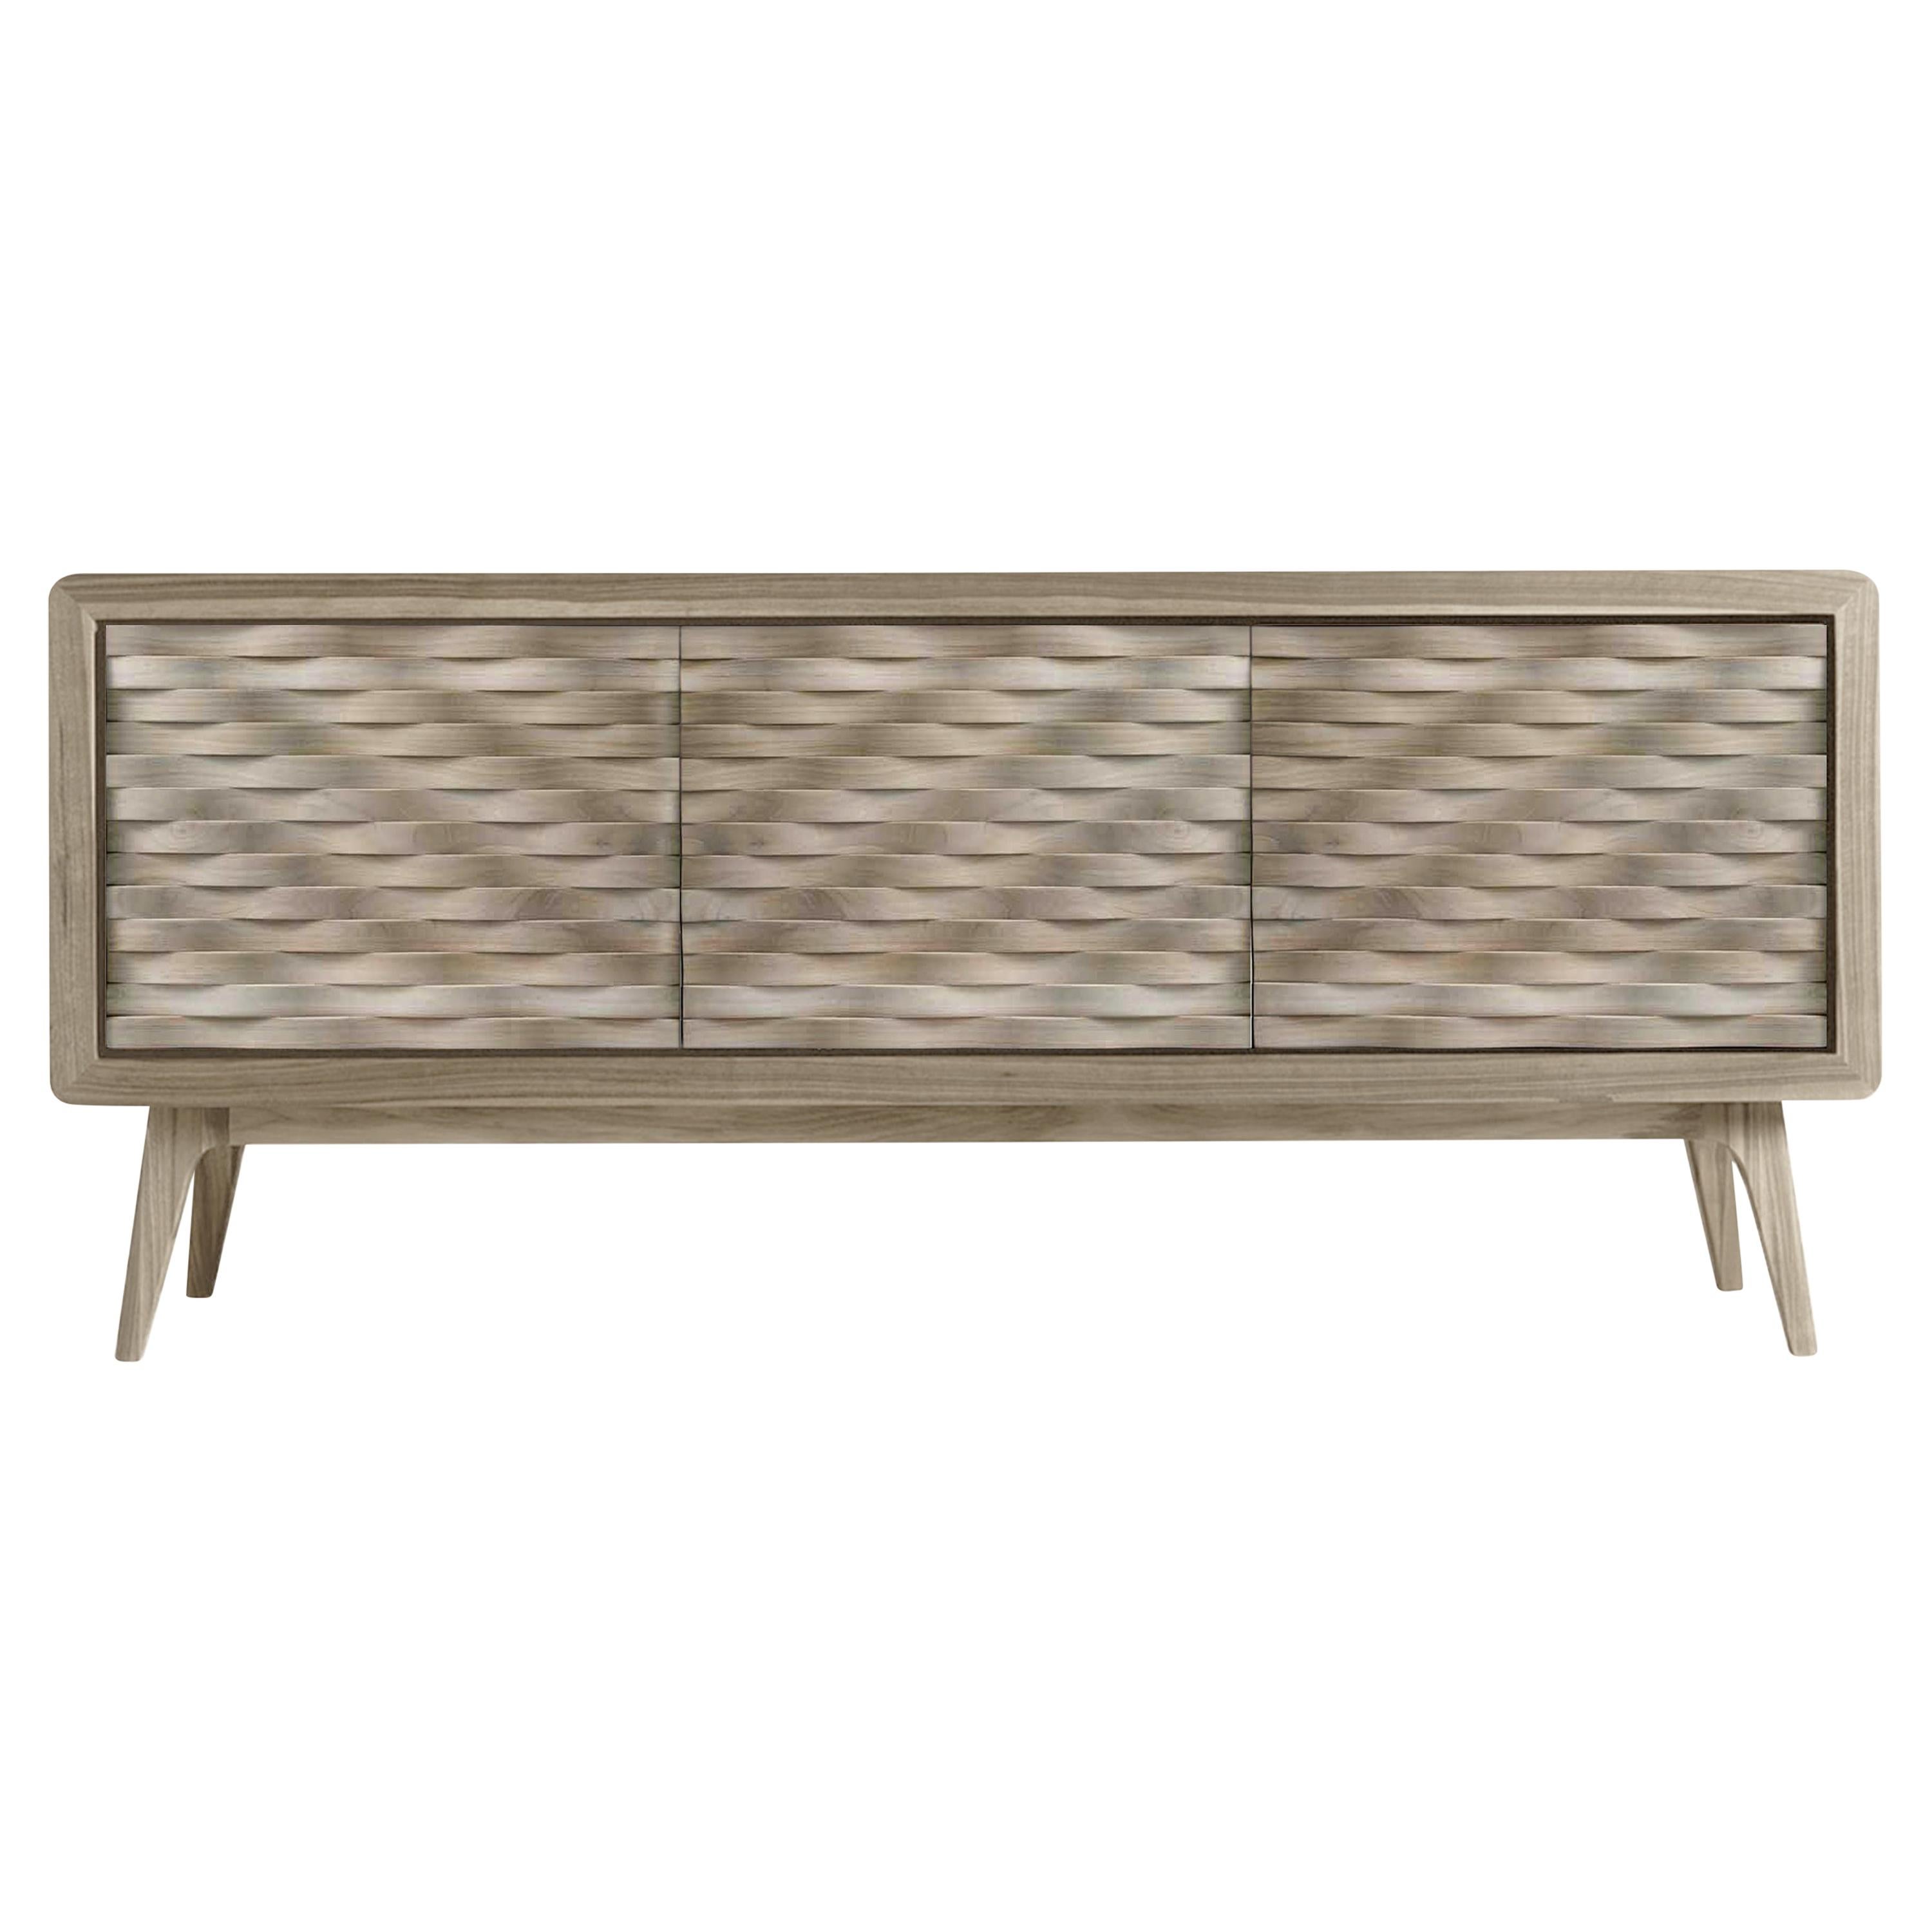 Artes Nastro Solid Wood Sideboard, Walnut Natural Grey Finish, Contemporary For Sale